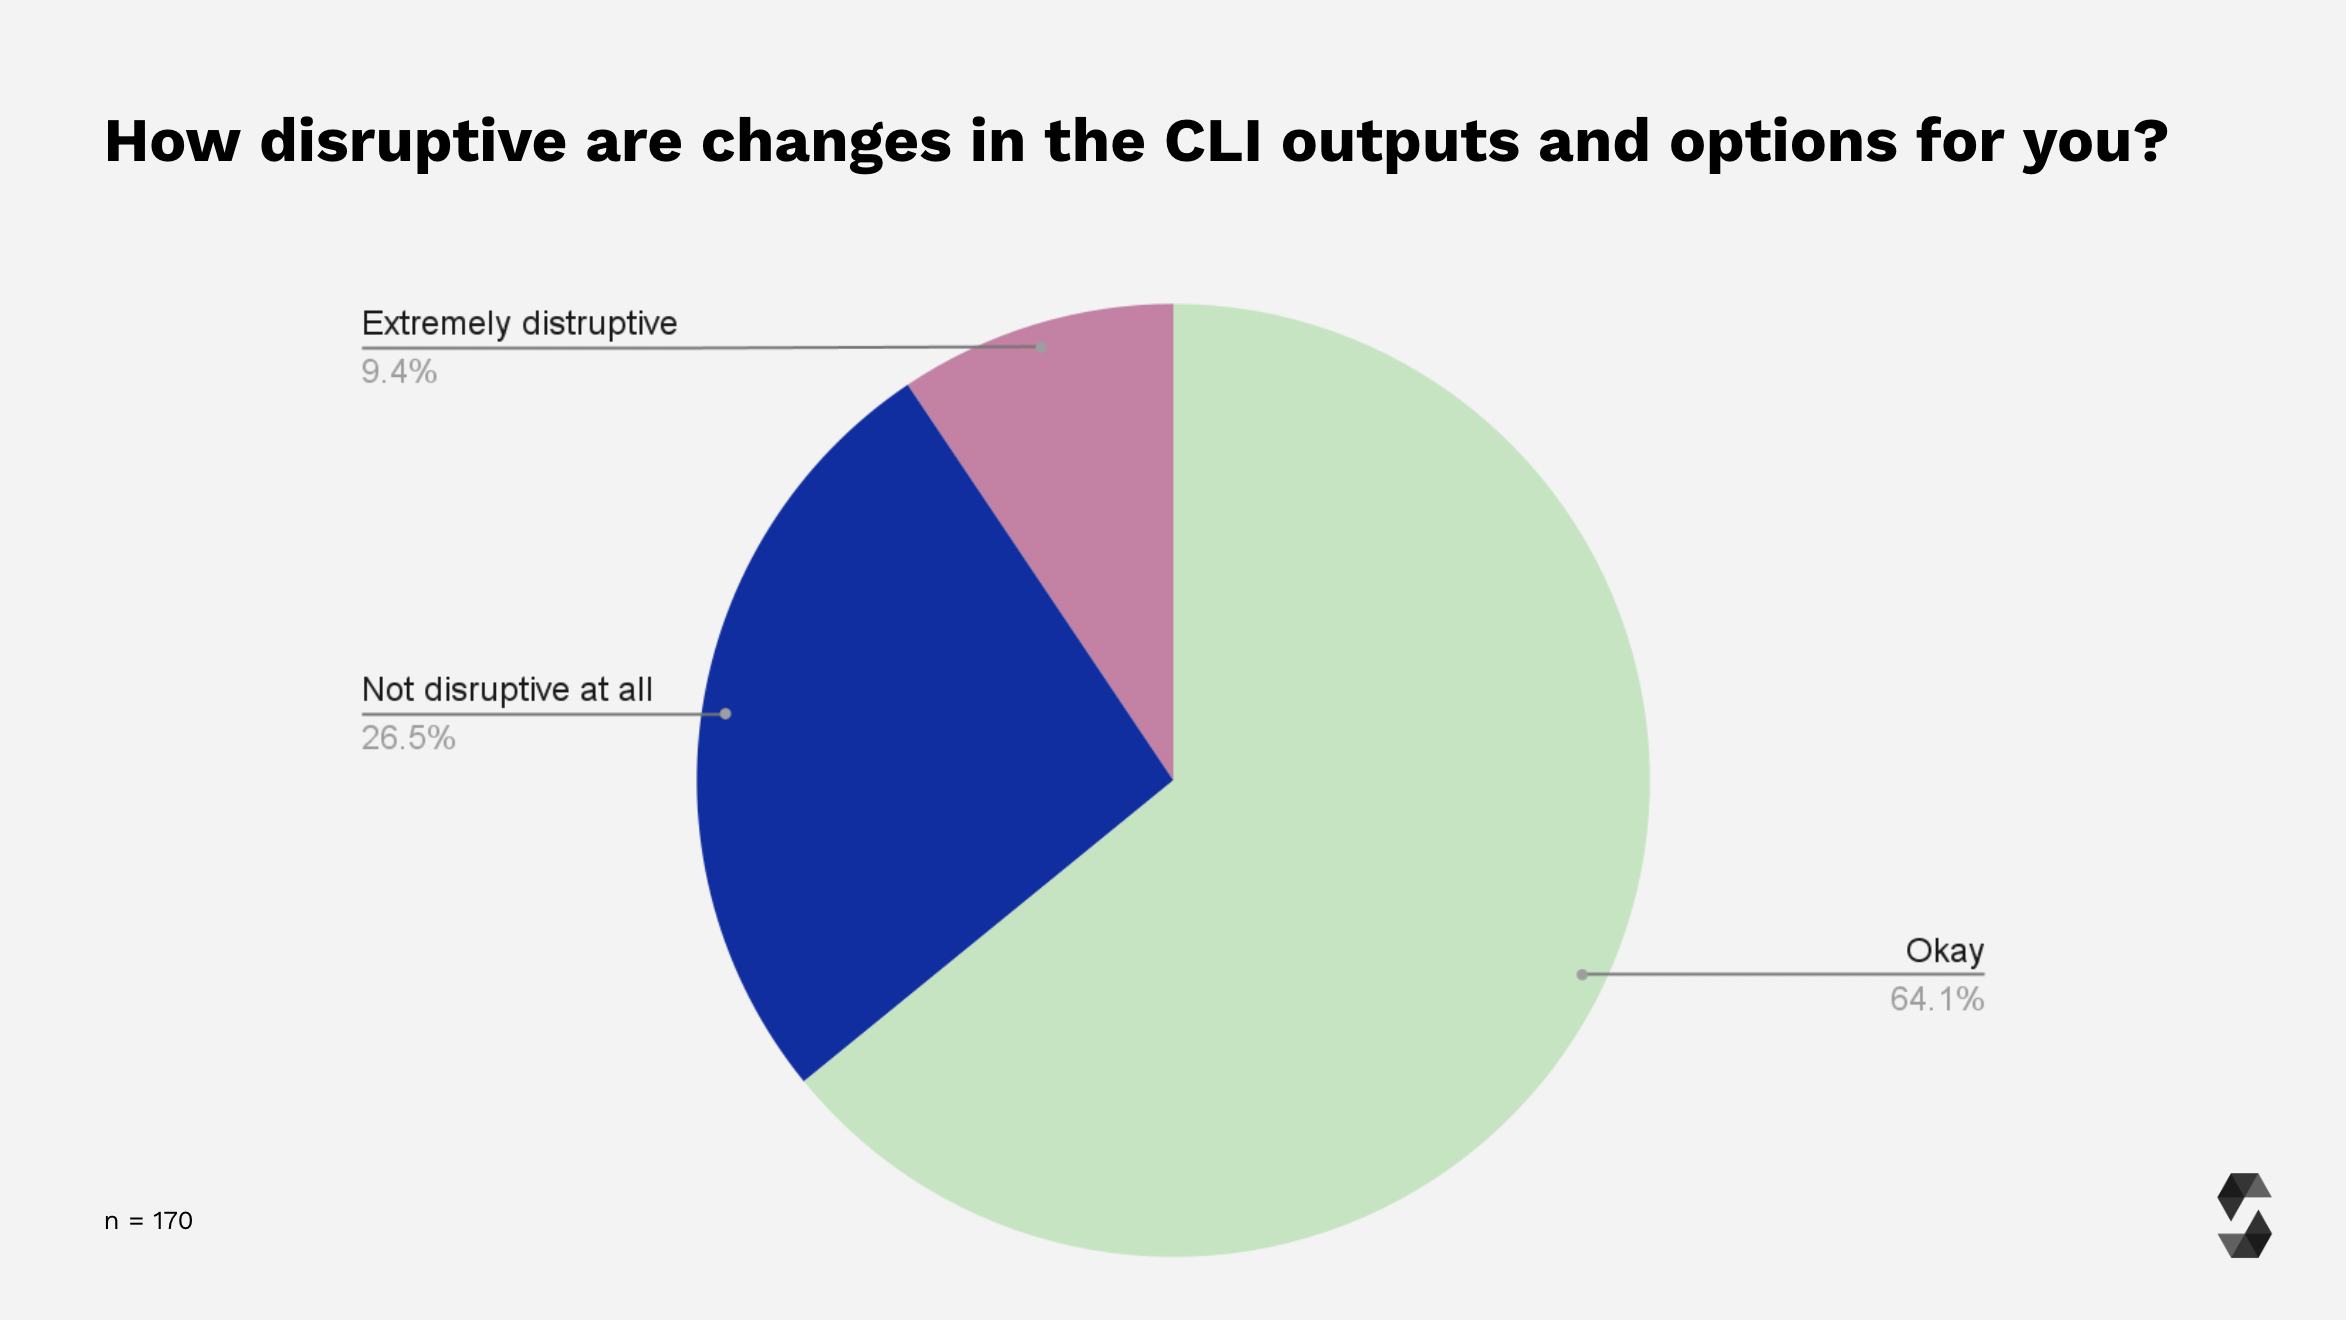 Disruptiveness of CLI changes